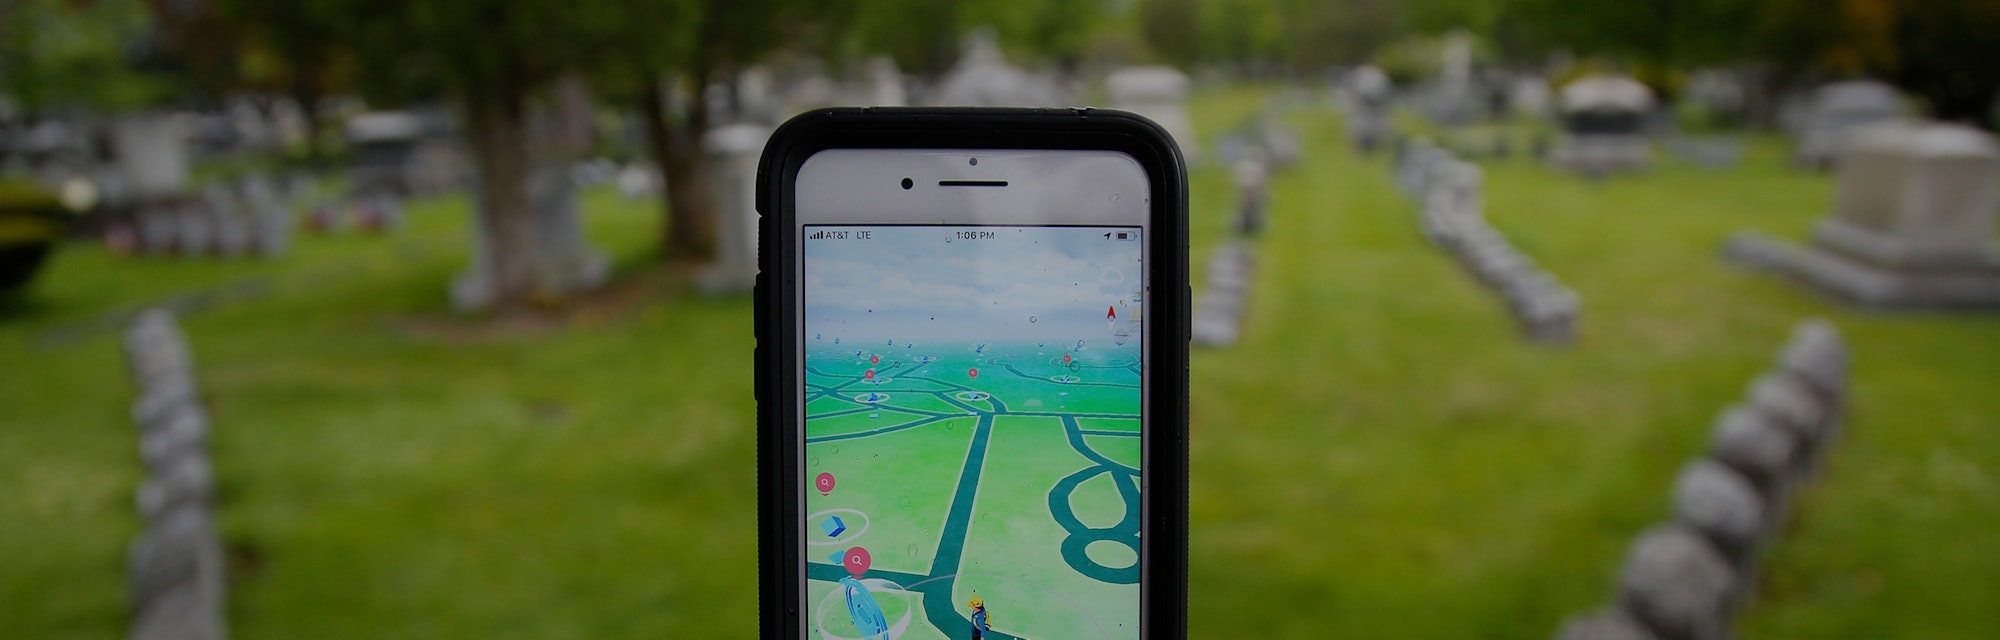 PORTLAND, ME - MAY 28: Evergreen Cemetery in Portland has been a spot where Pokemon Go players have ...